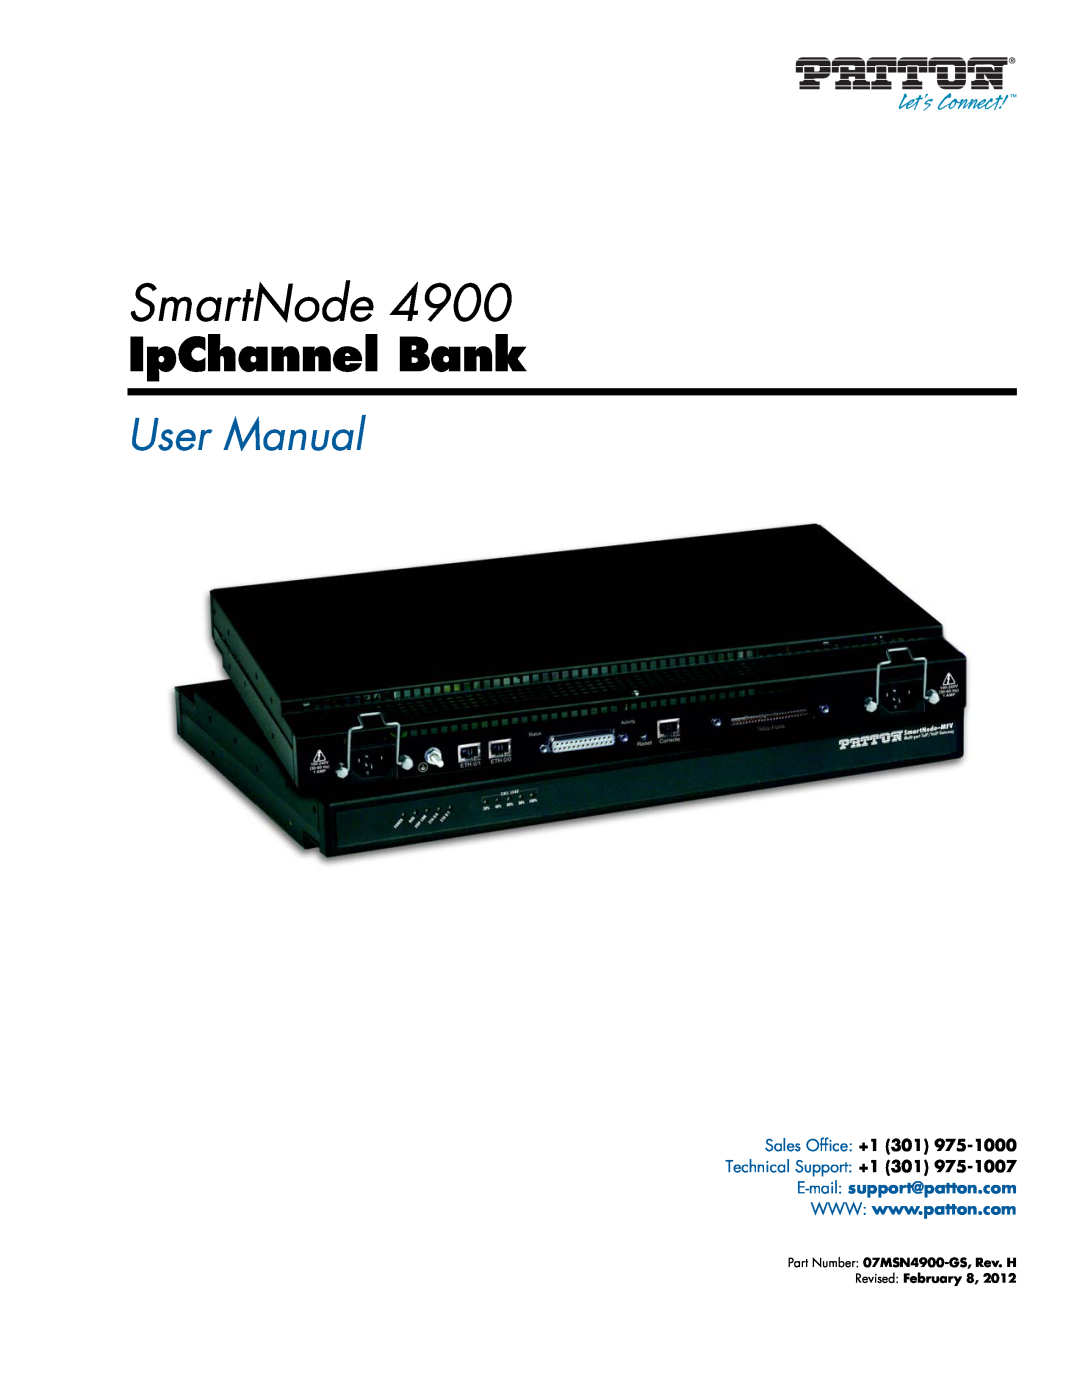 Patton electronic 4900 user manual SmartNode, IpChannel Bank, User Manual, Sales Office +1 301, Technical Support +1 301 